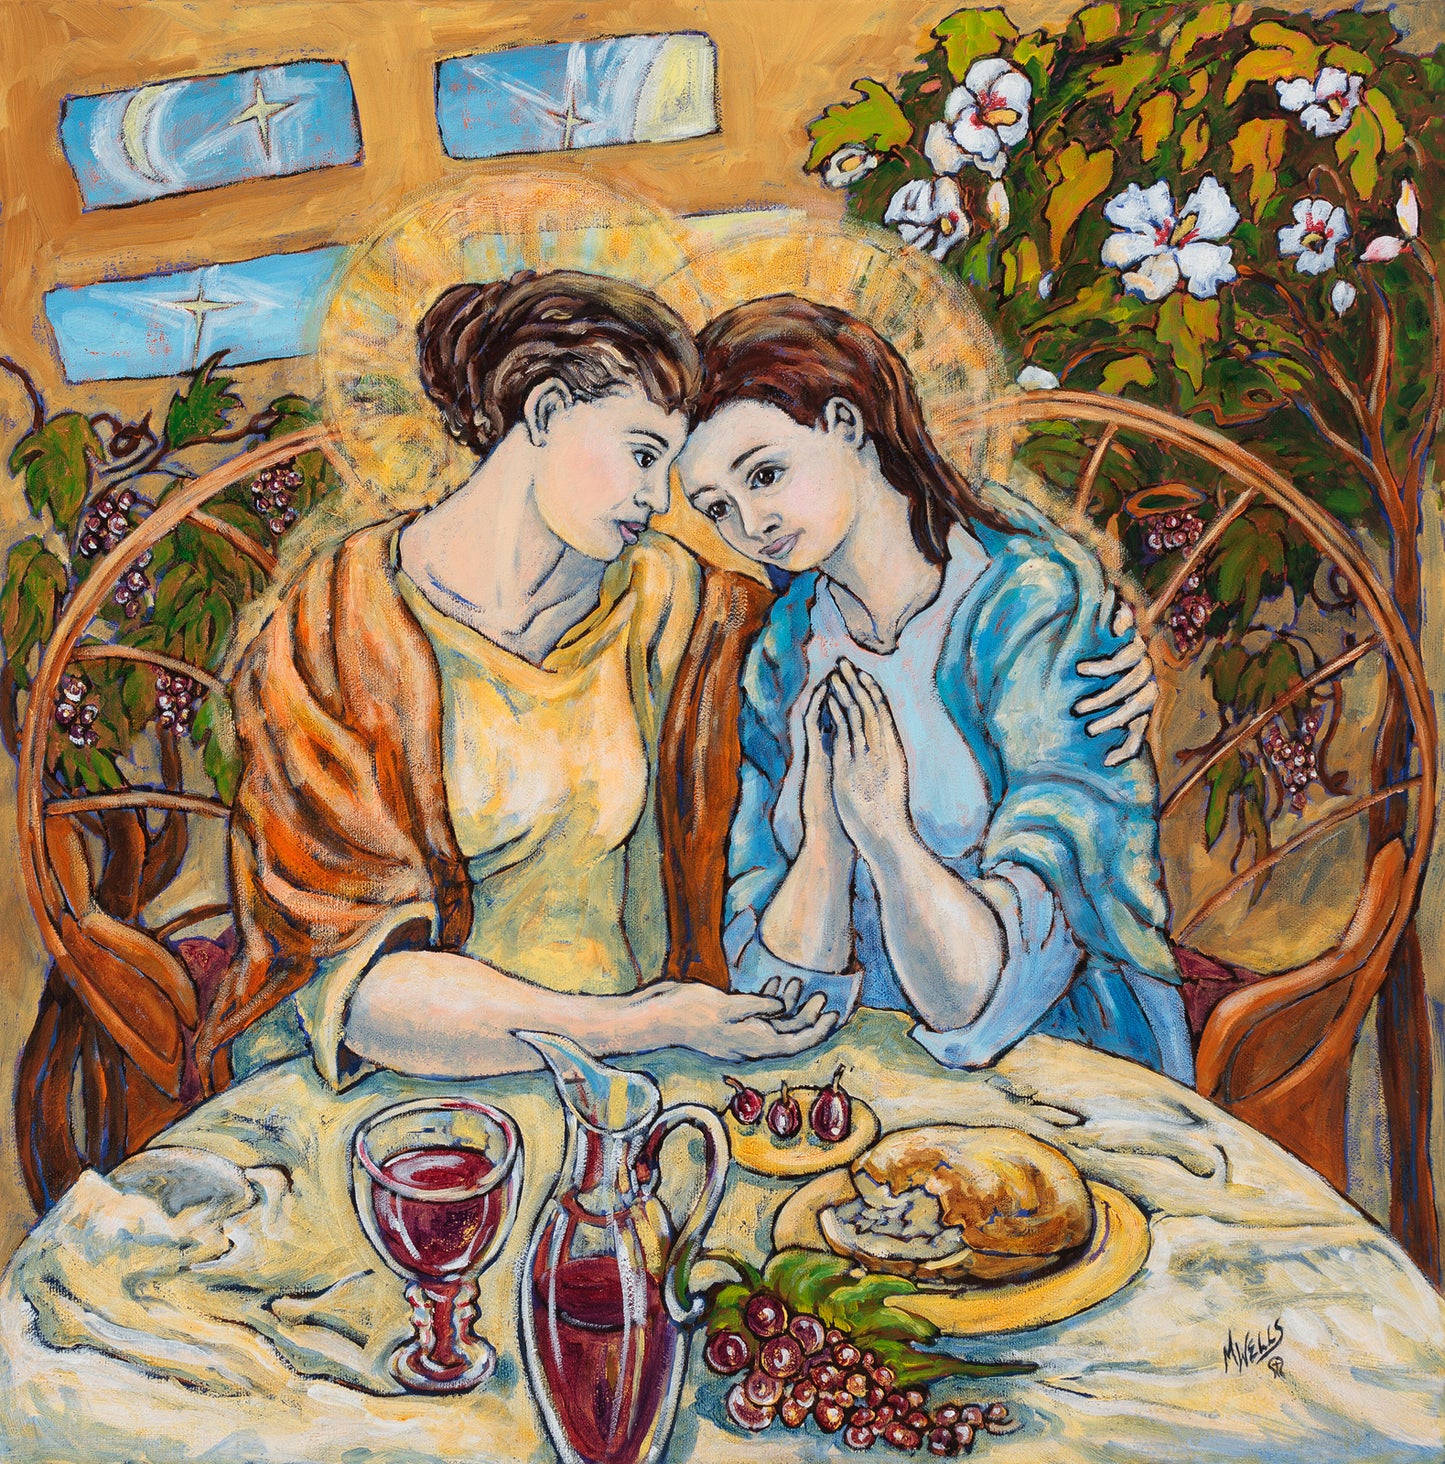 "Mother and Daughter News" Original Oil by Marilyn Wells women in art, woman art, mothers and daughters